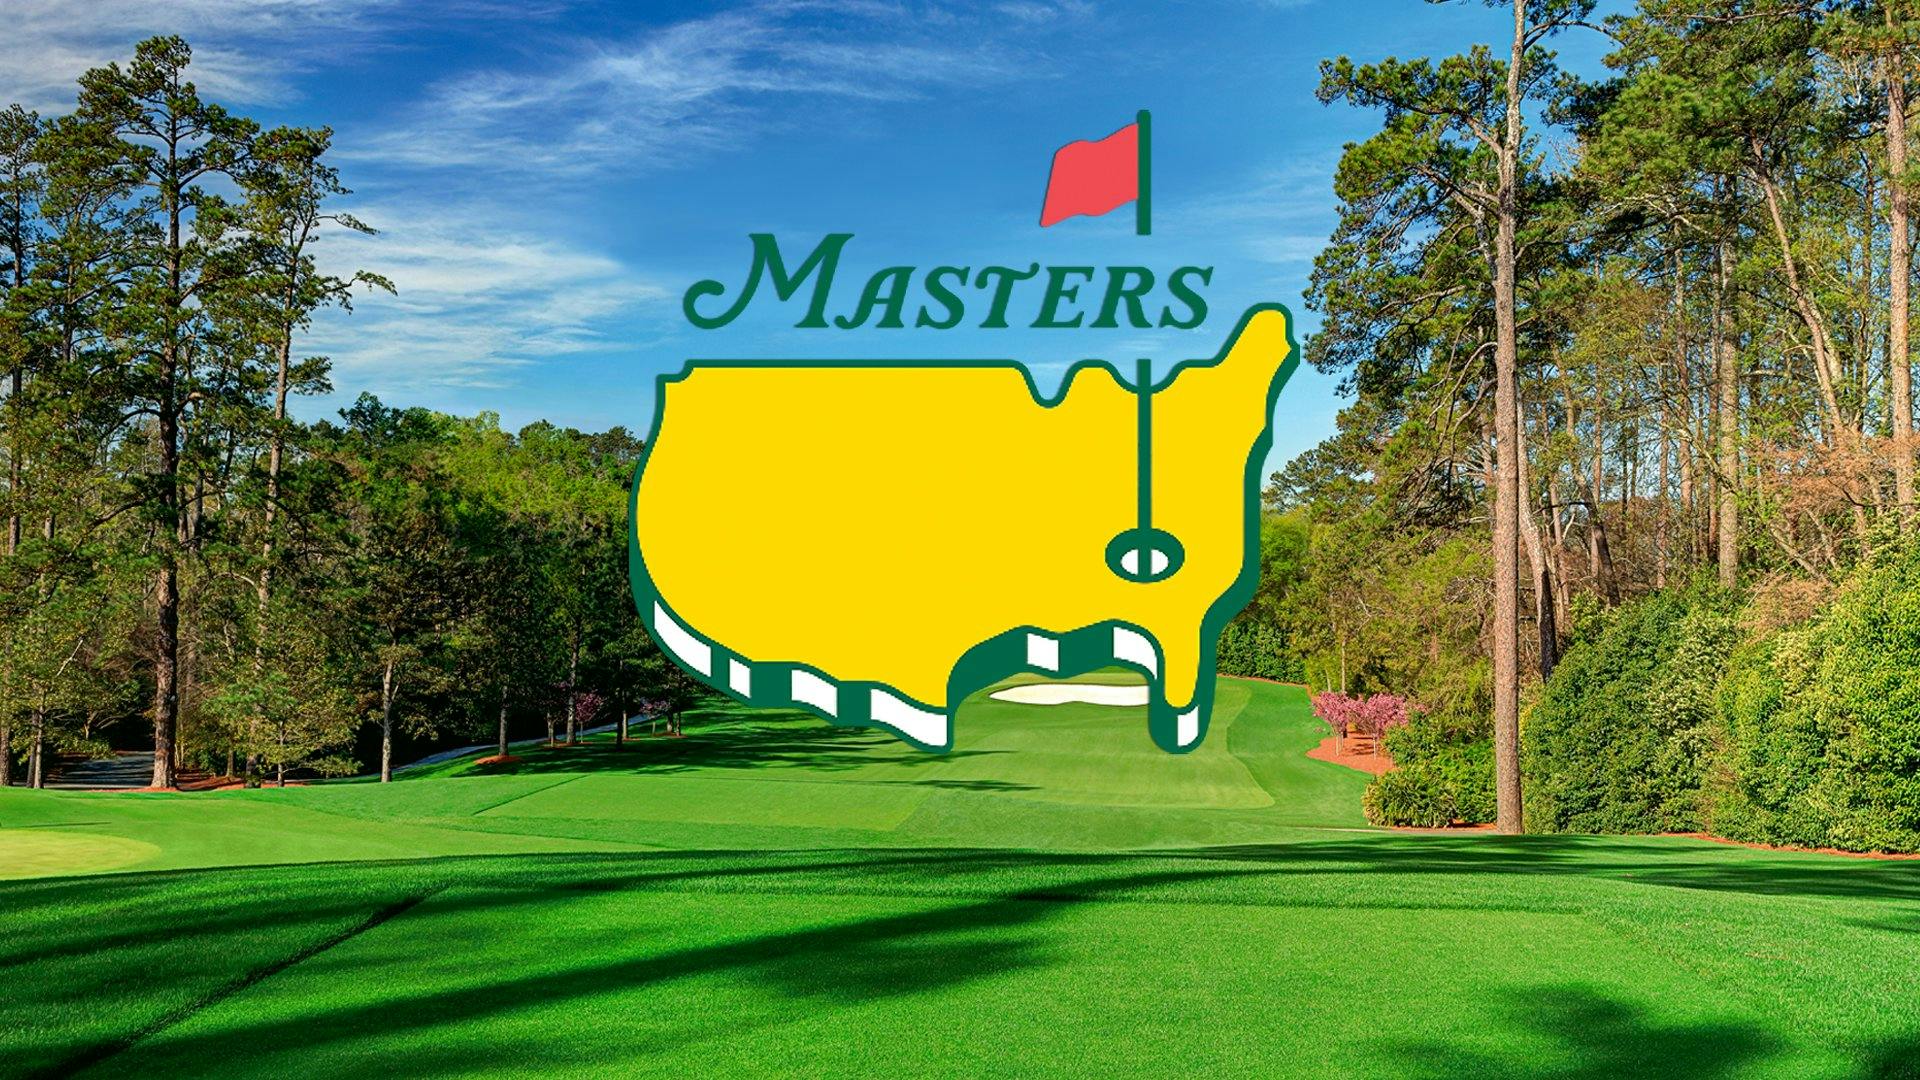 The masters golf